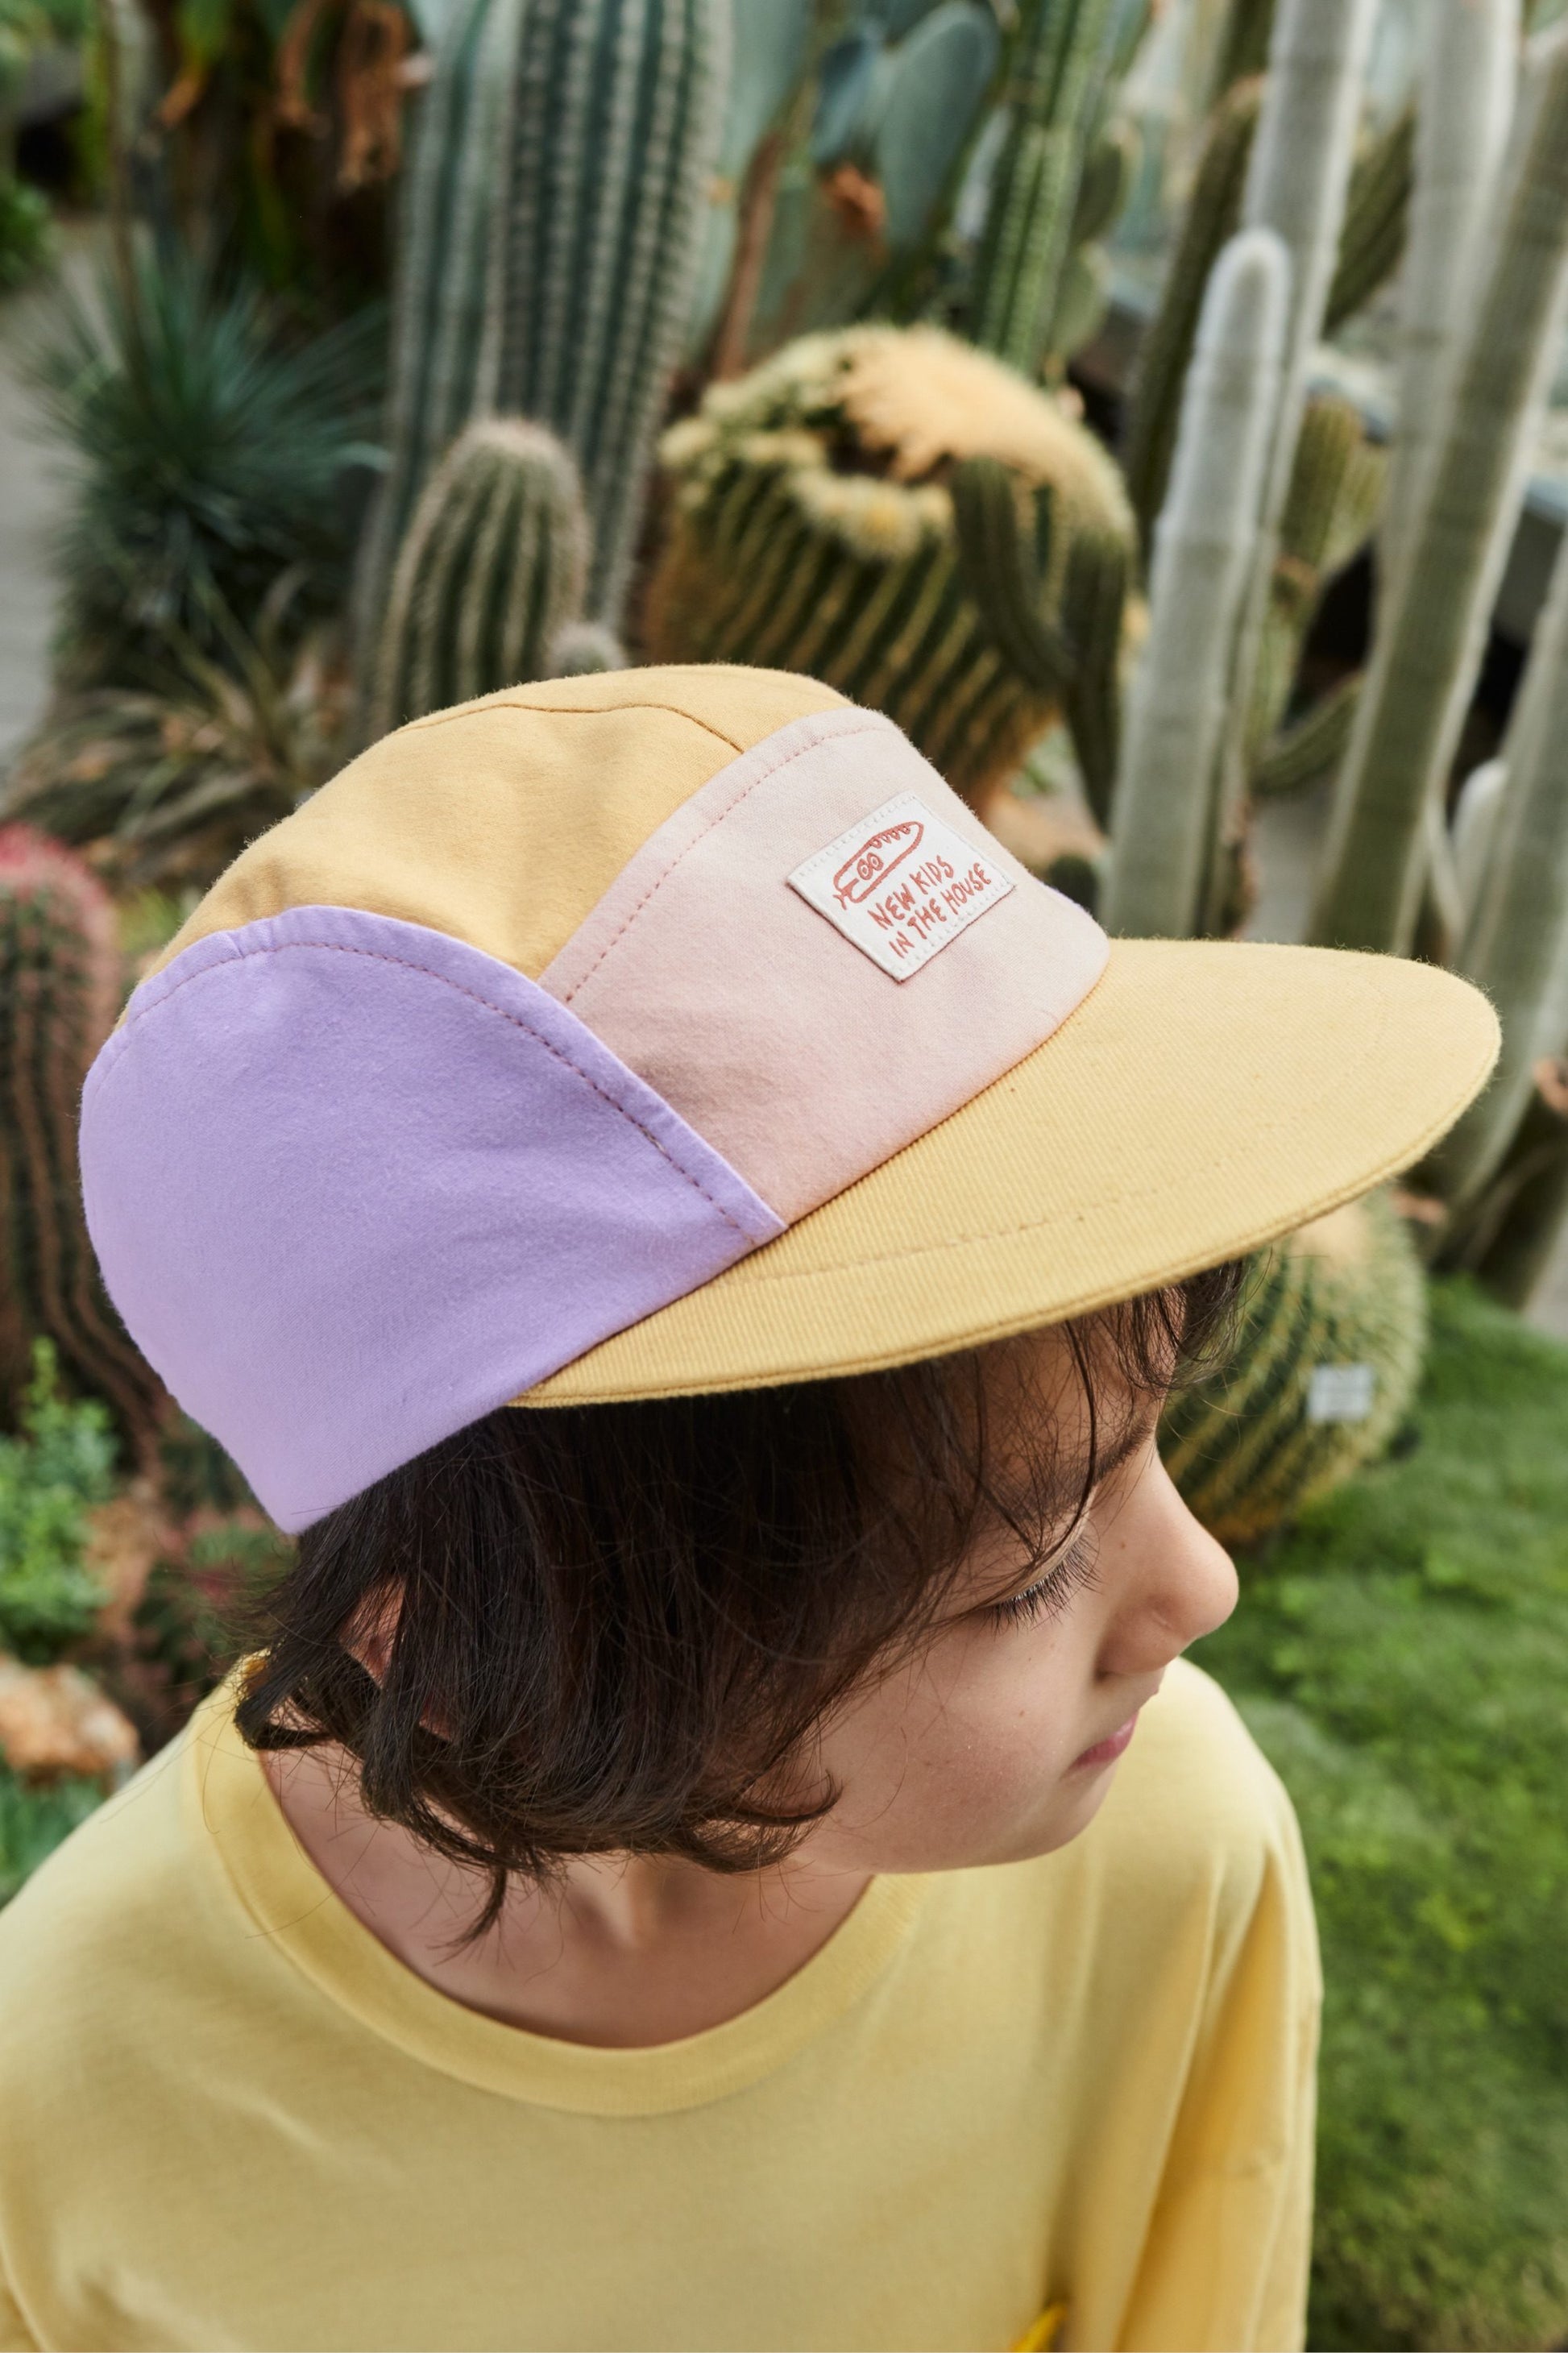 Calvin is a 5-panel cap for kids aged between 2 and 6. It is adjustable, so it grows with your kid. Made from pre-used bedlinen, with cotton lining & soft visor.  - Made in Germany